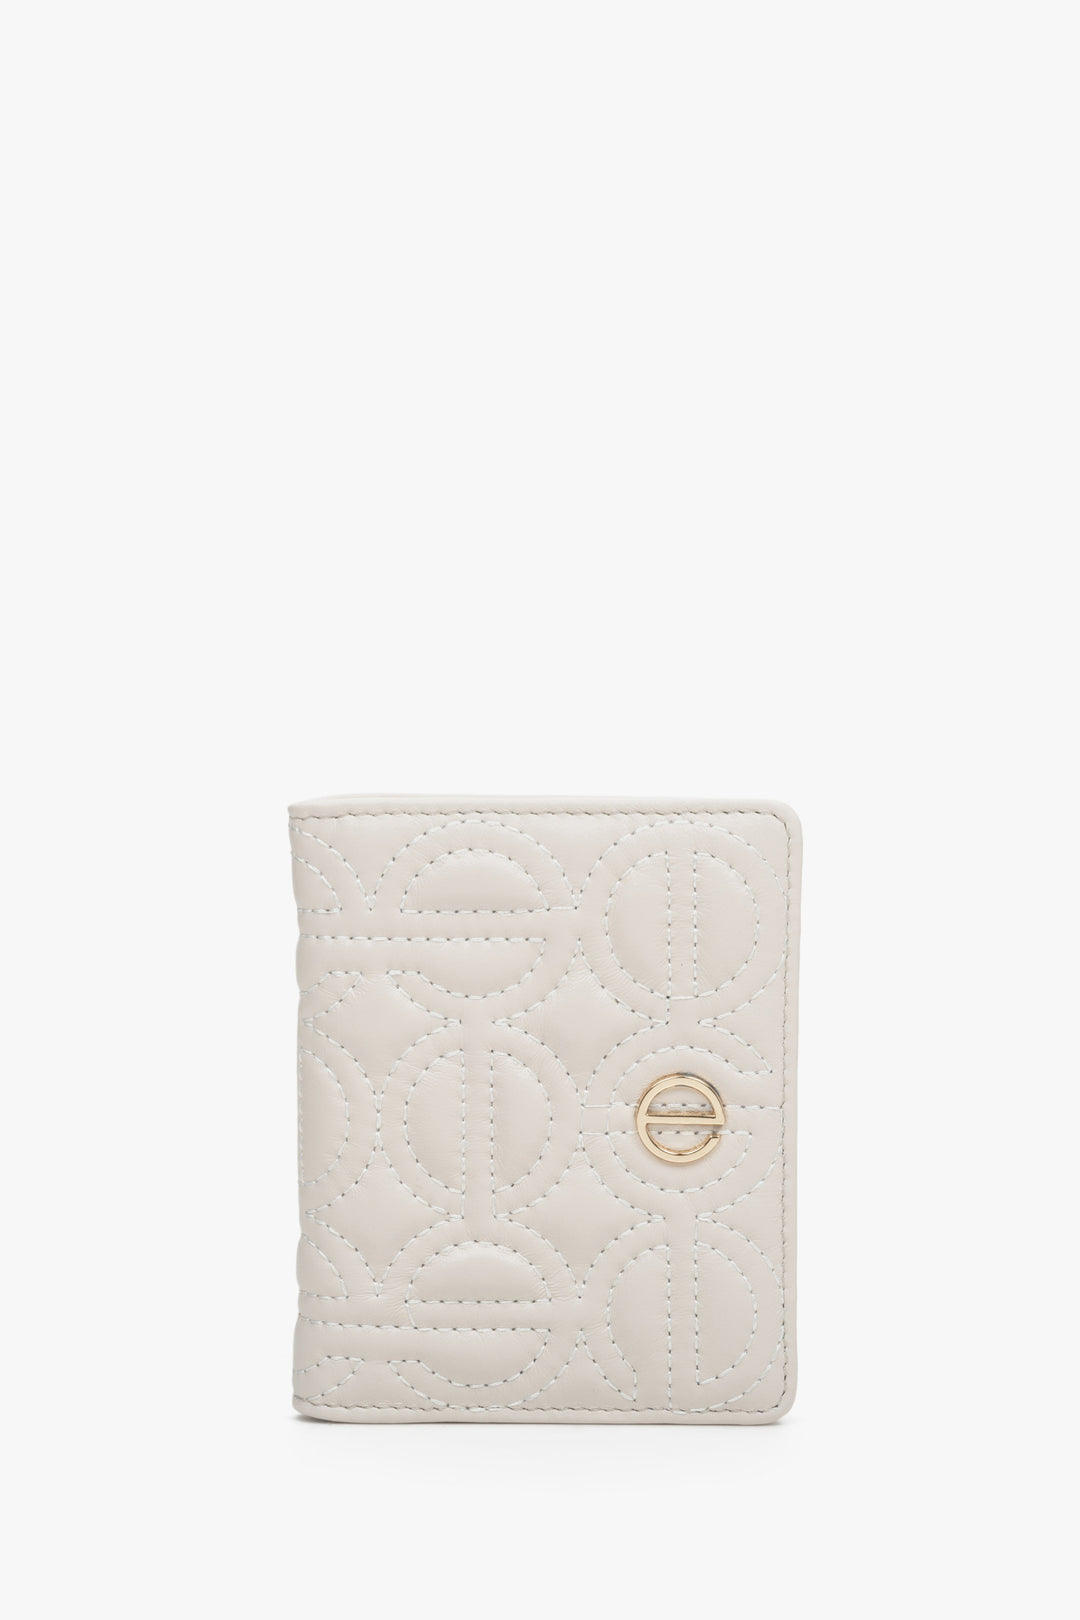 Women's Light Beige Card Wallet made of Genuine Leather with Silver Accents Estro ER00113656.